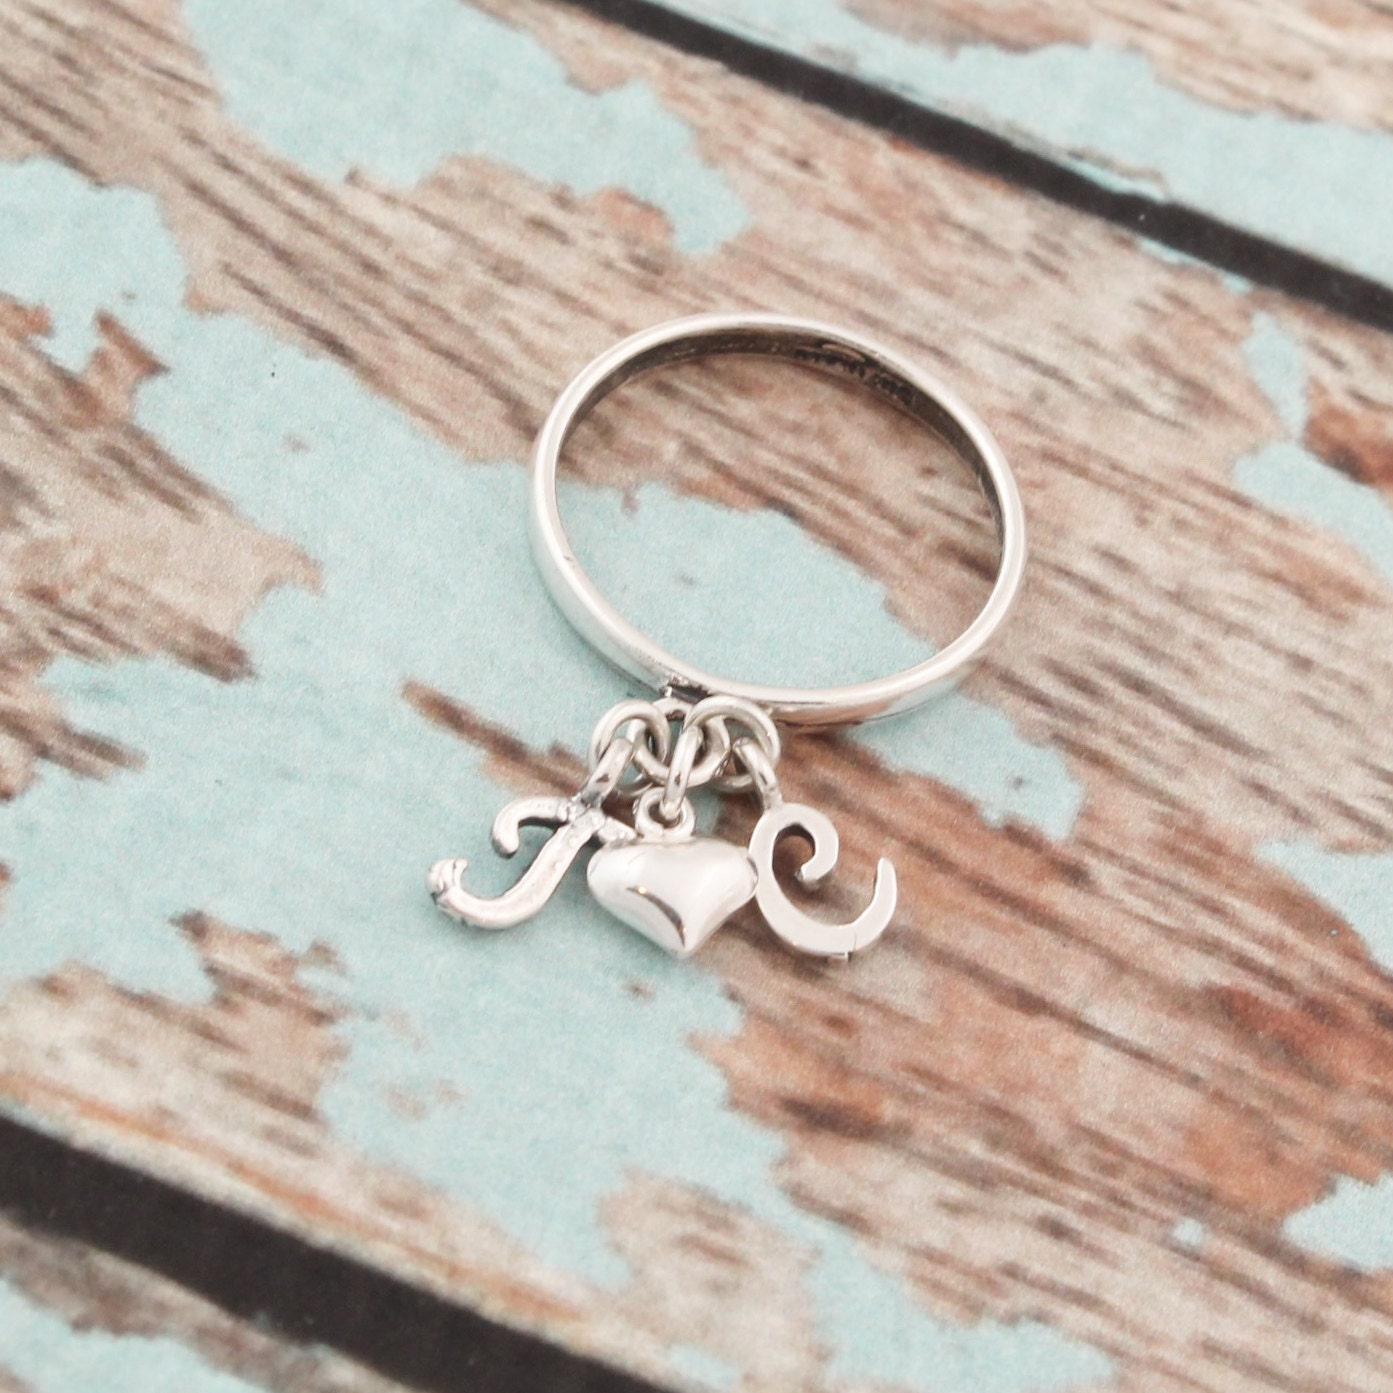 Initial Charm Ring. Sterling Silver Initial Ring. Dangle Ring. Personalized Jewelry. Initial Jewelry.